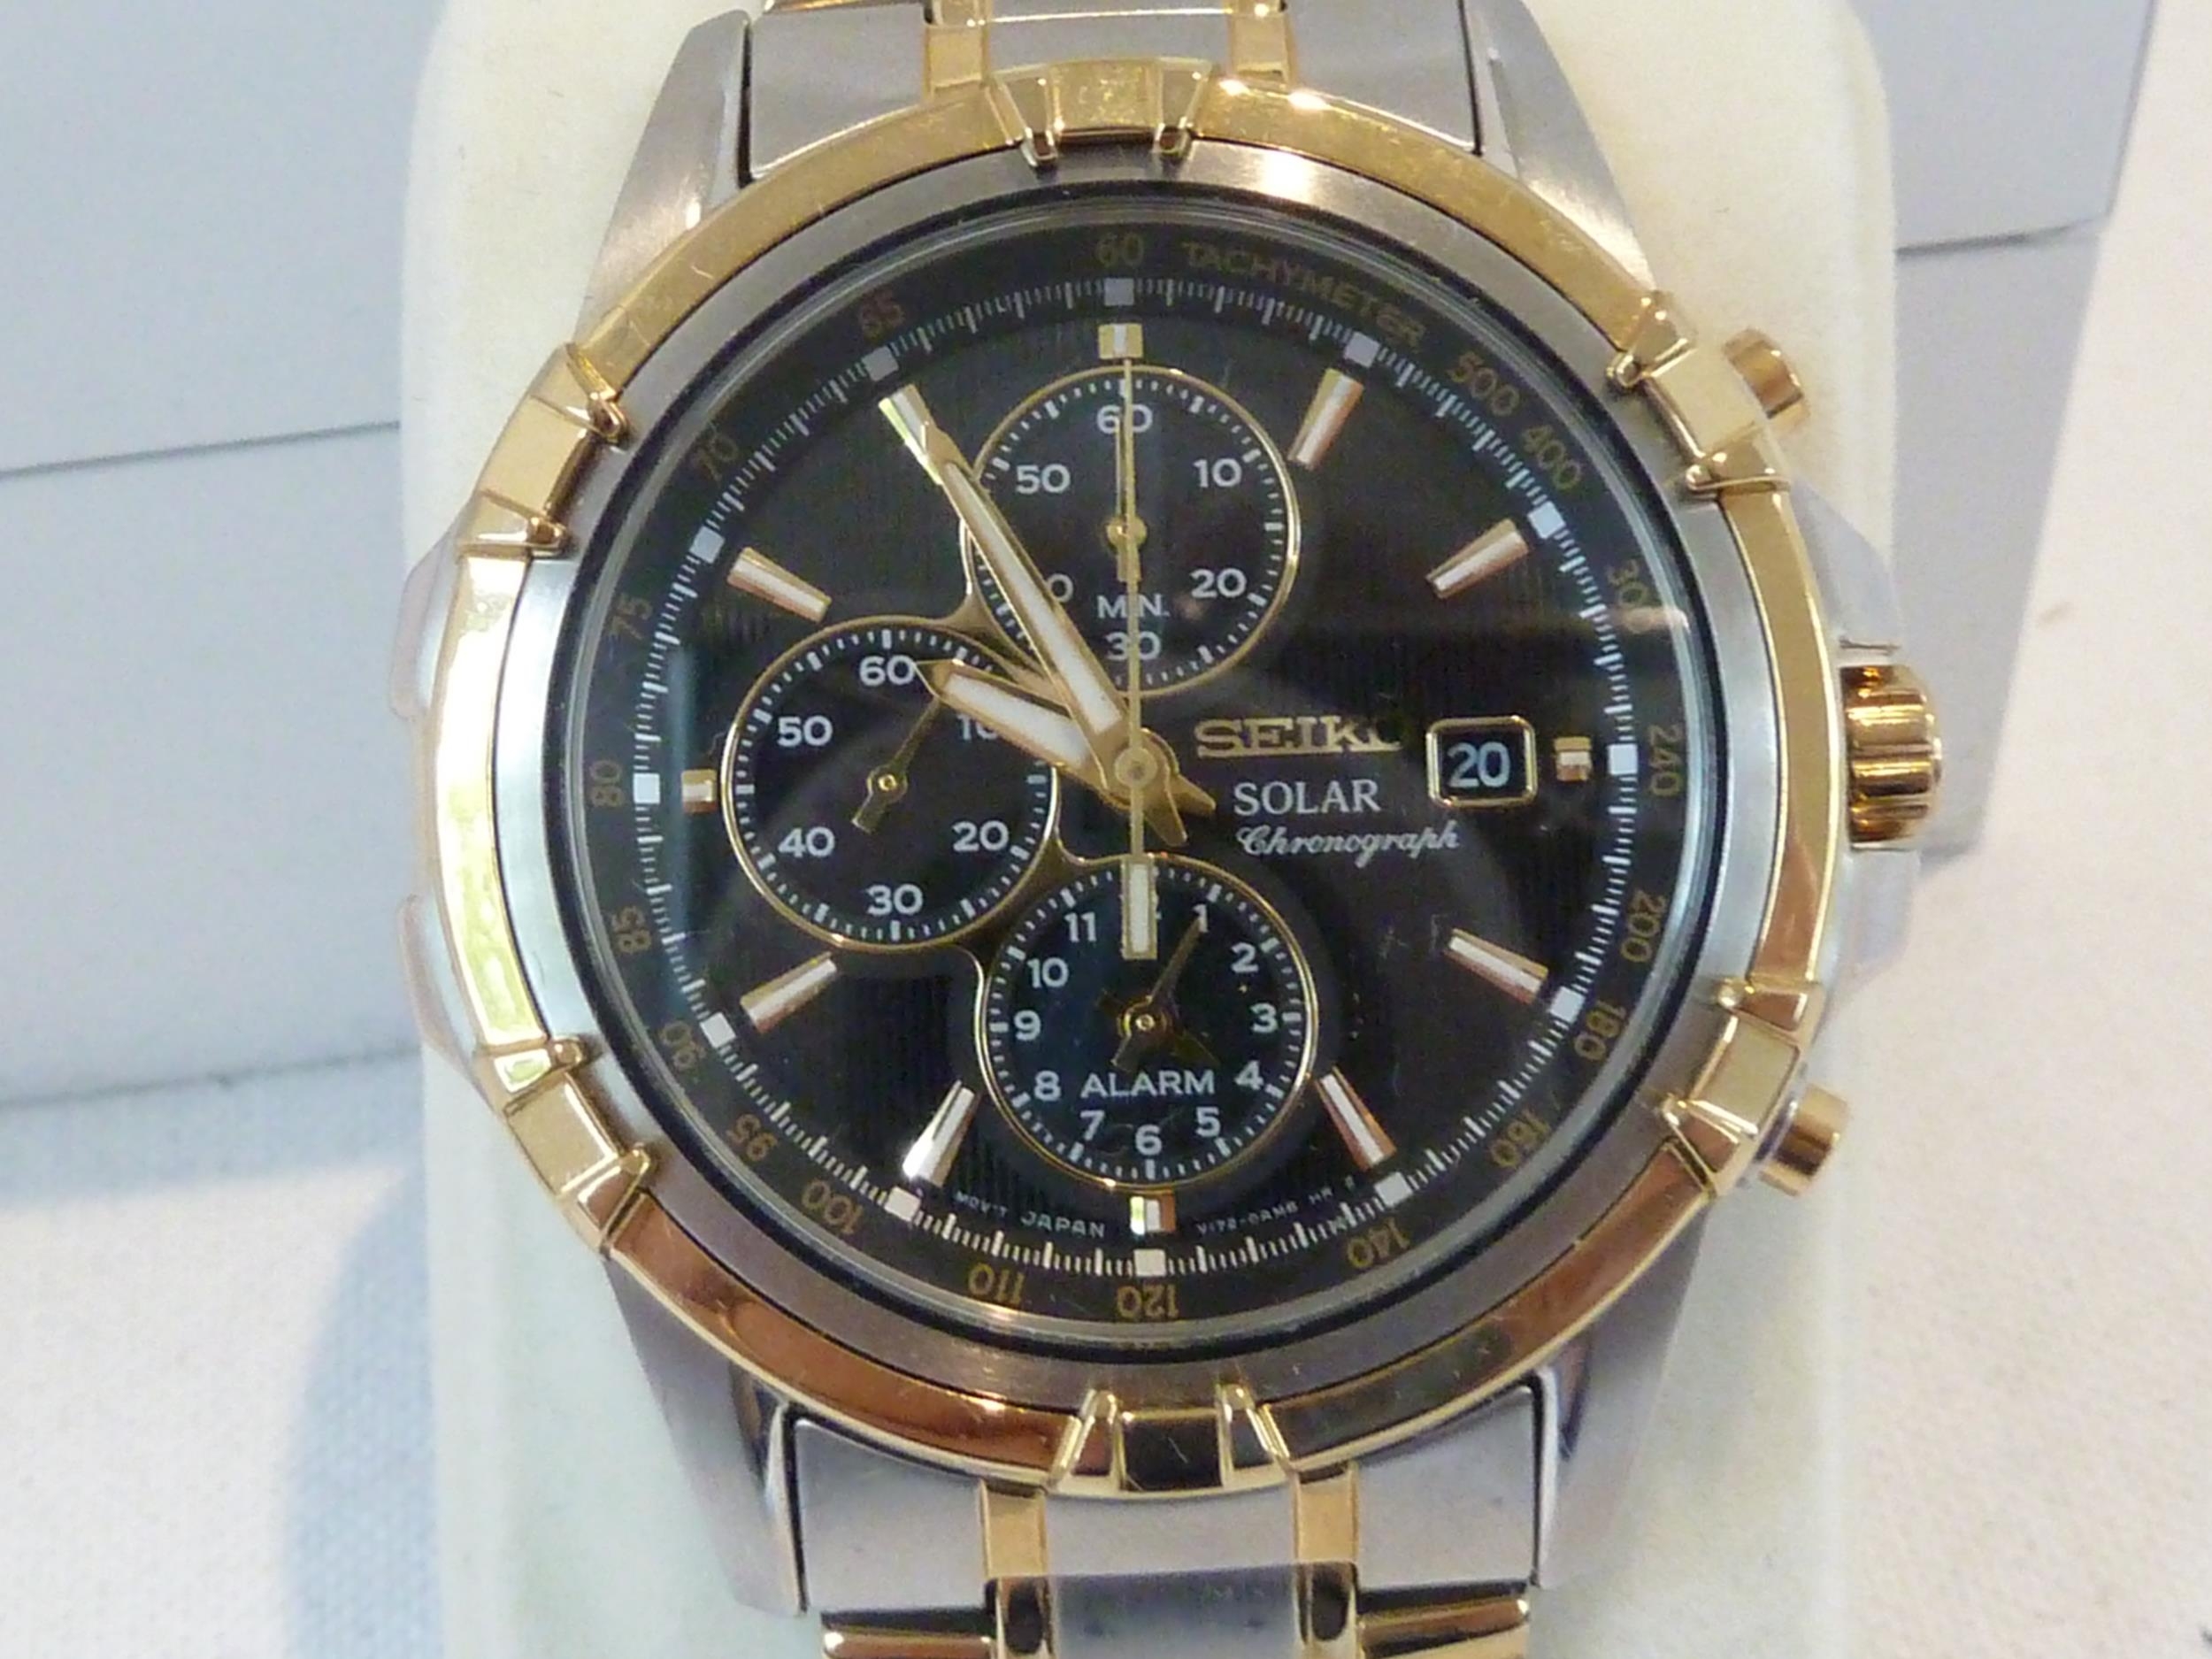 Seiko Solar Chronograph Date watch, V172-0AJ0, black dial, Stainless steel  and gold finish, unworn c